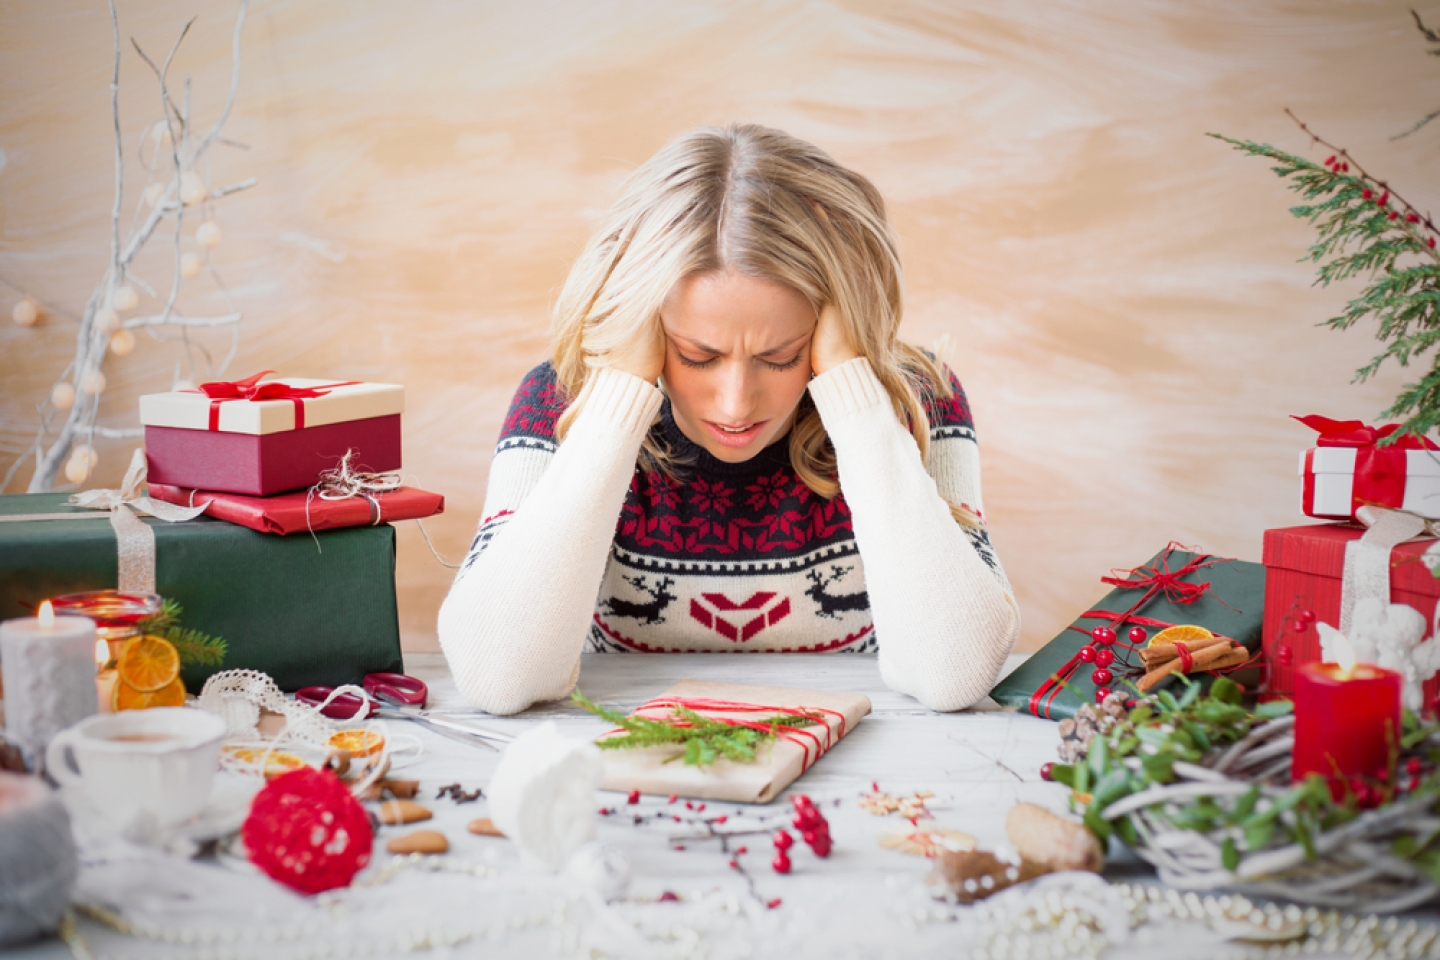 Woman depressed with Christmas gift clutter